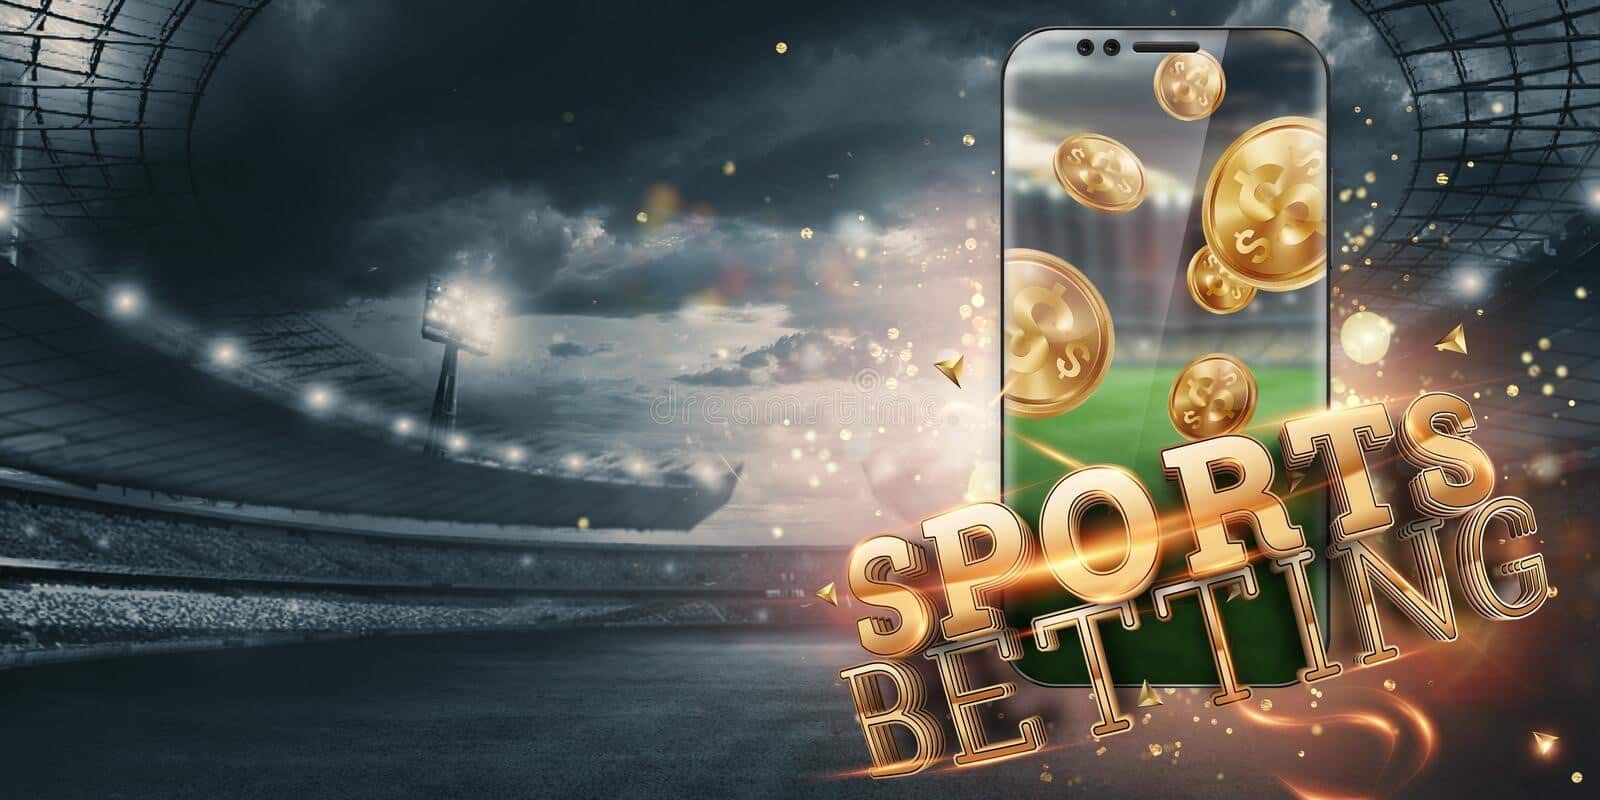 What are the benefits of sports betting?